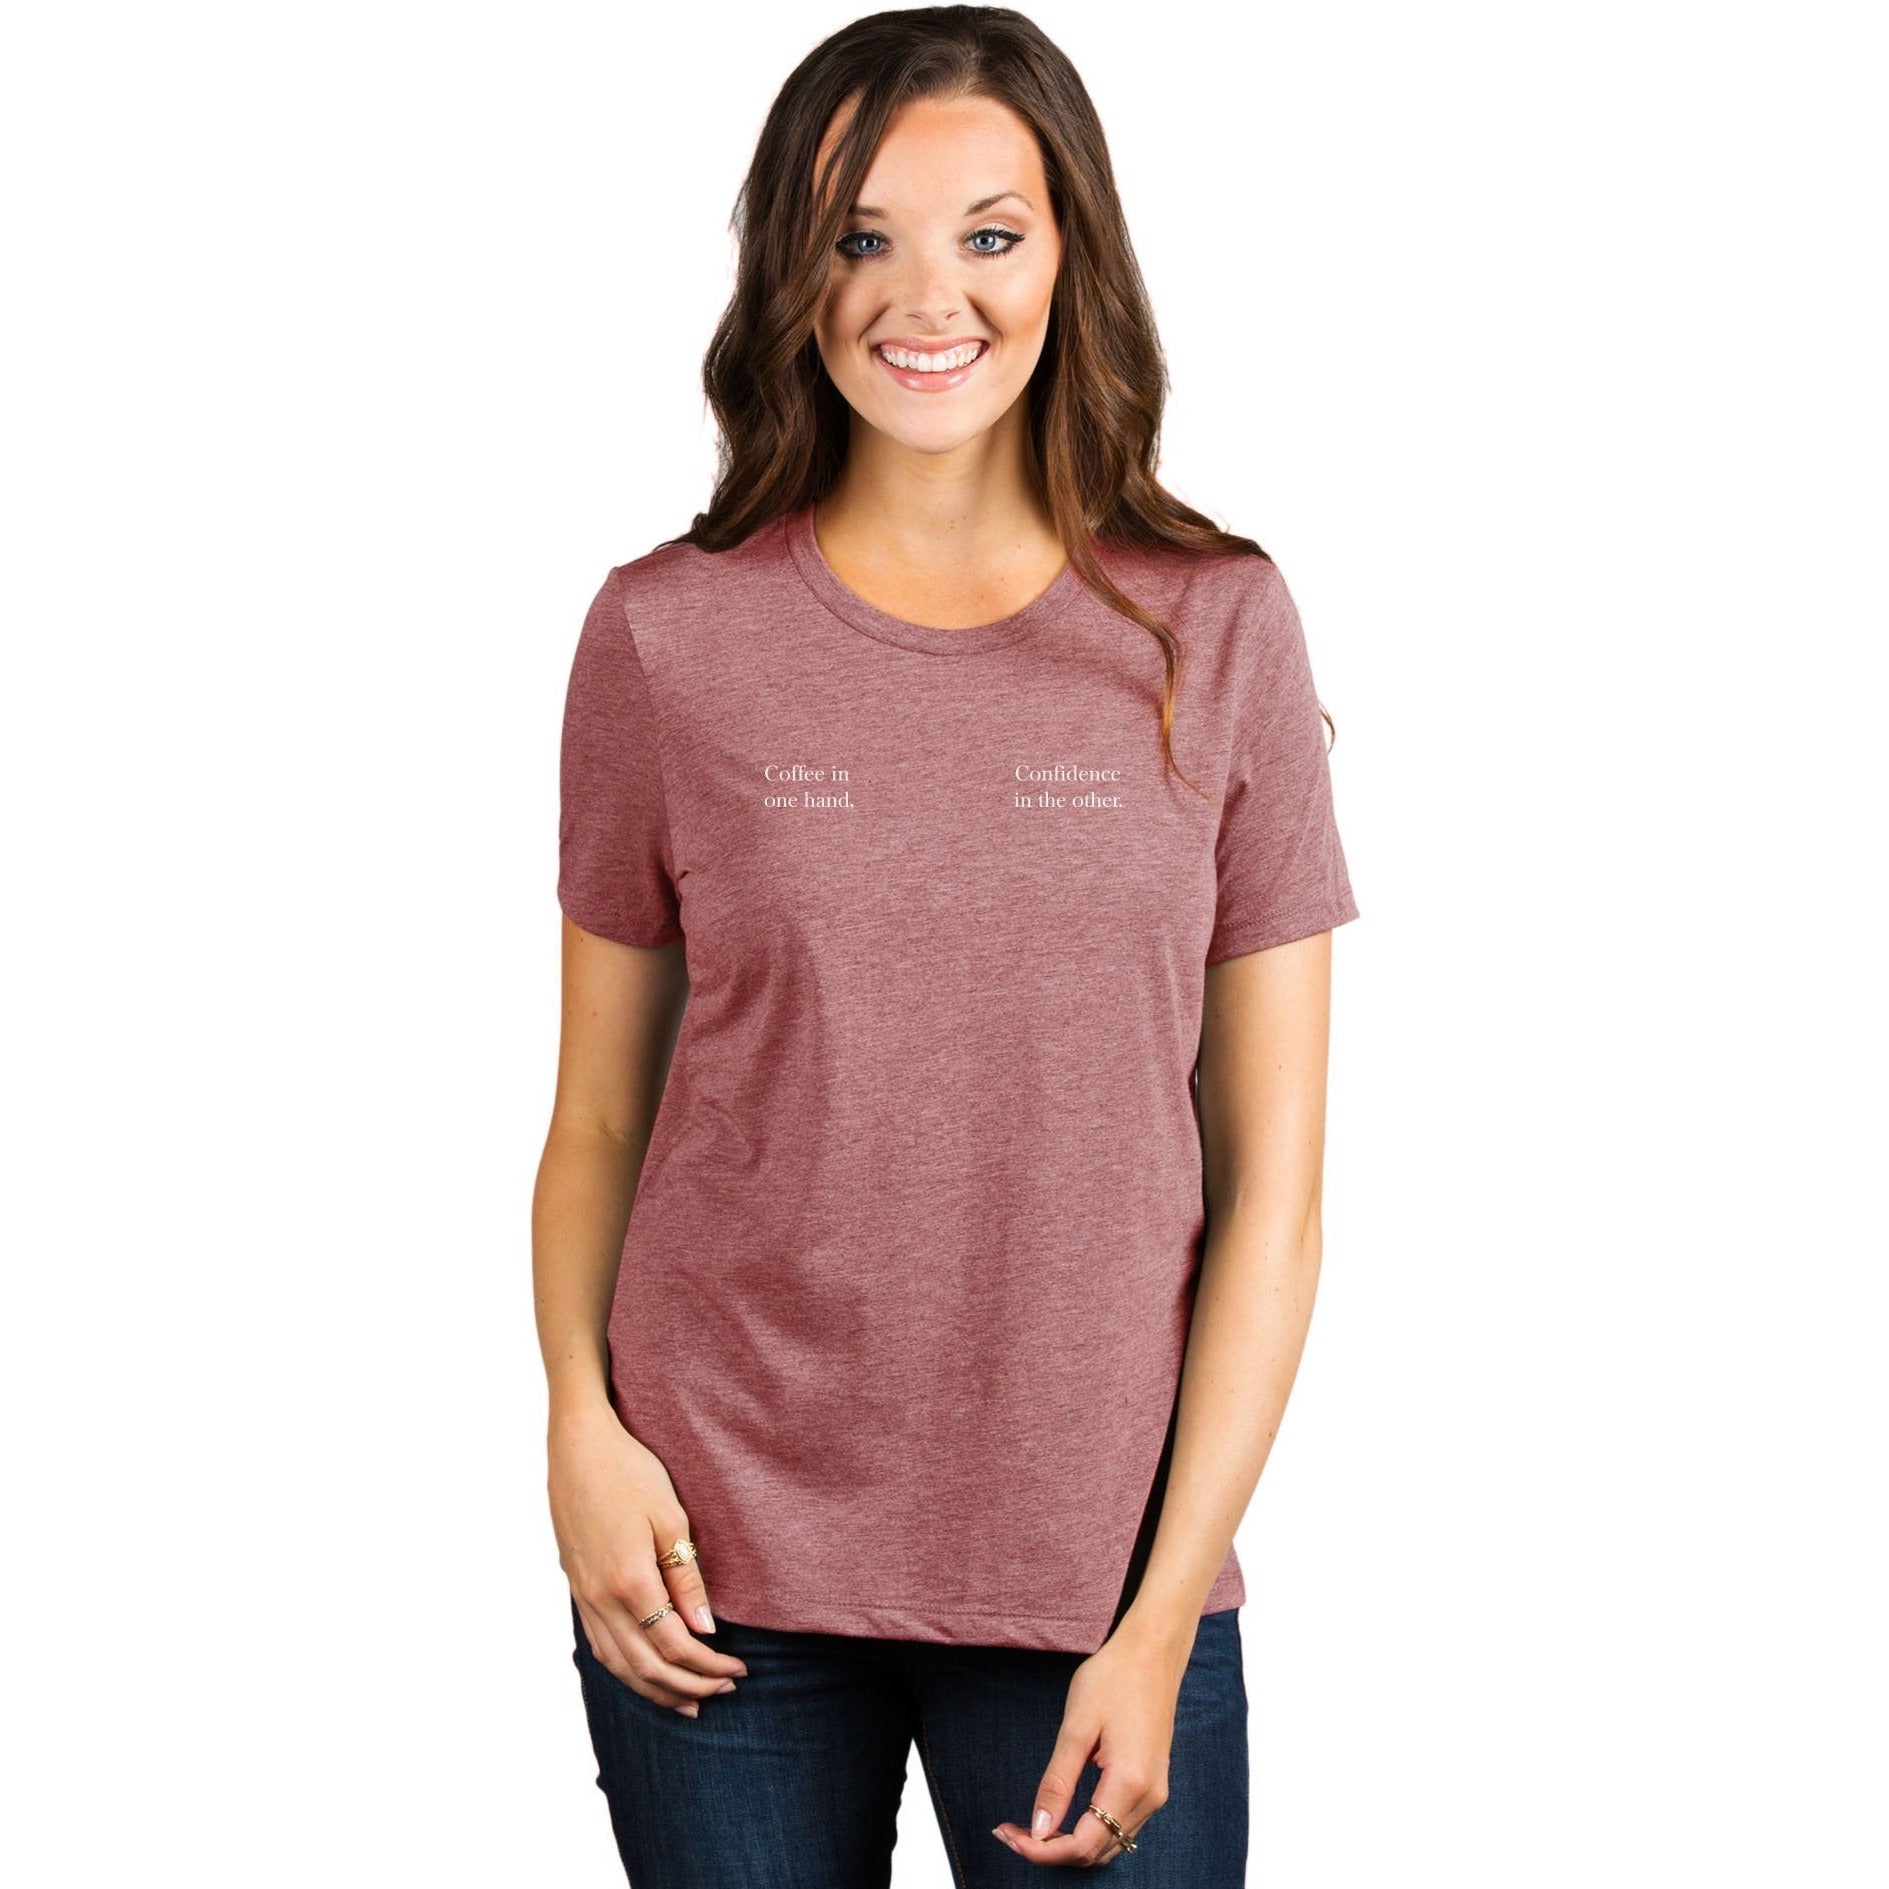 Coffee In One Hand Confidence Other Women's Relaxed Crewneck T-Shirt Top Tee Heather Rouge Model
